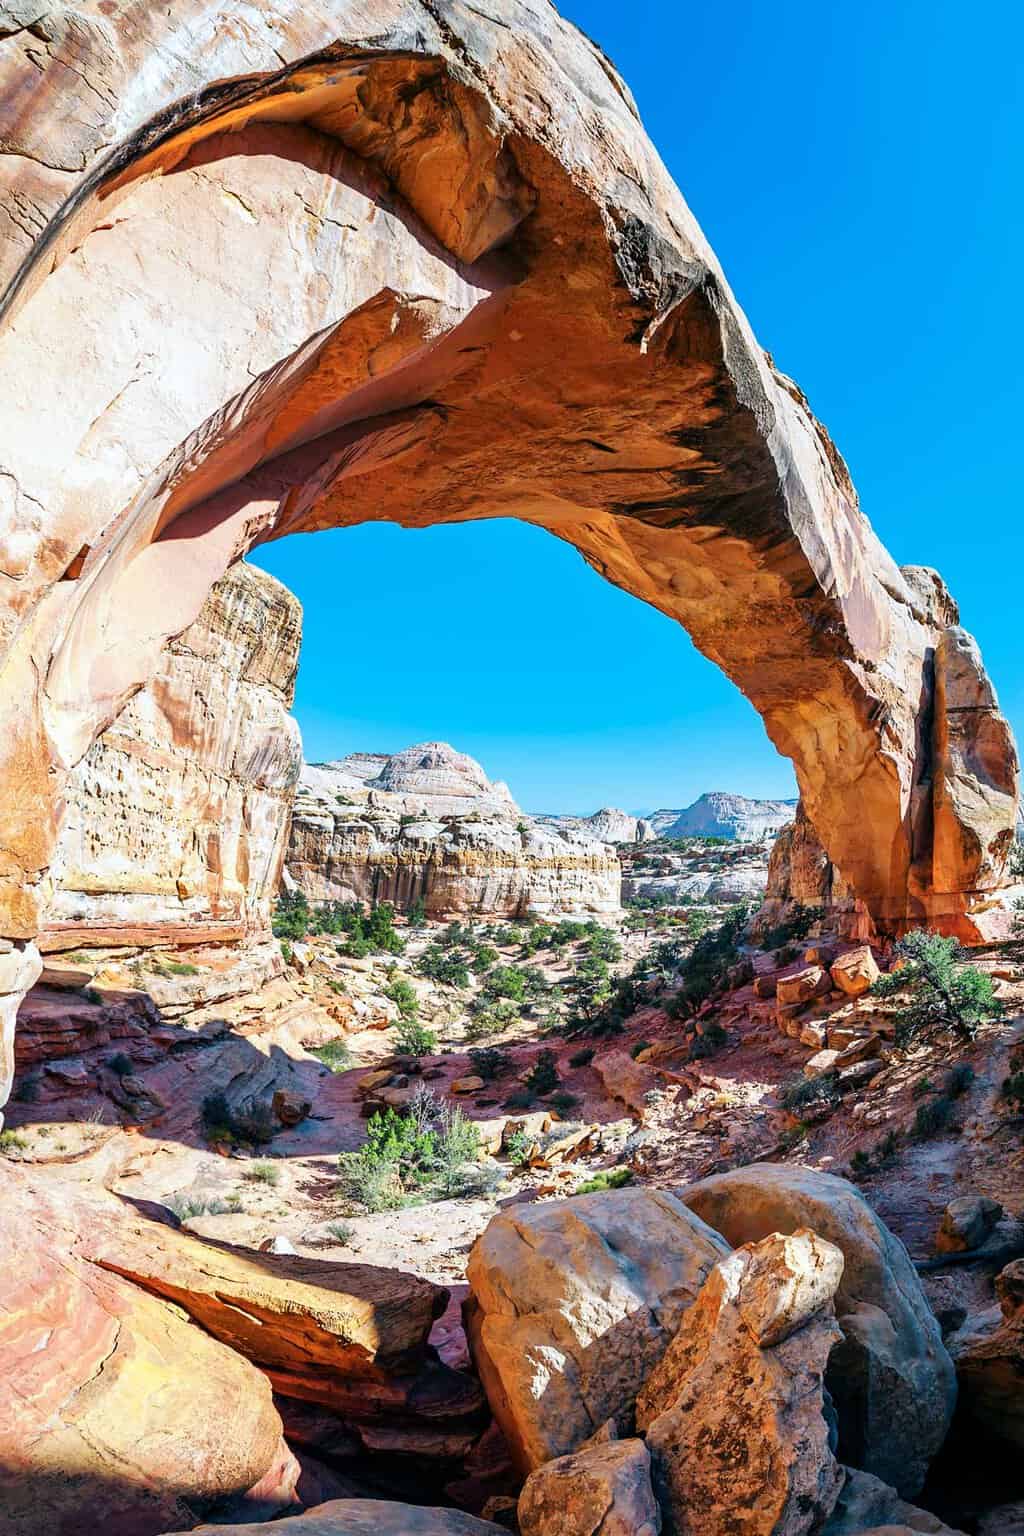 Views through a natural rock arch in Capitol Reef National park.